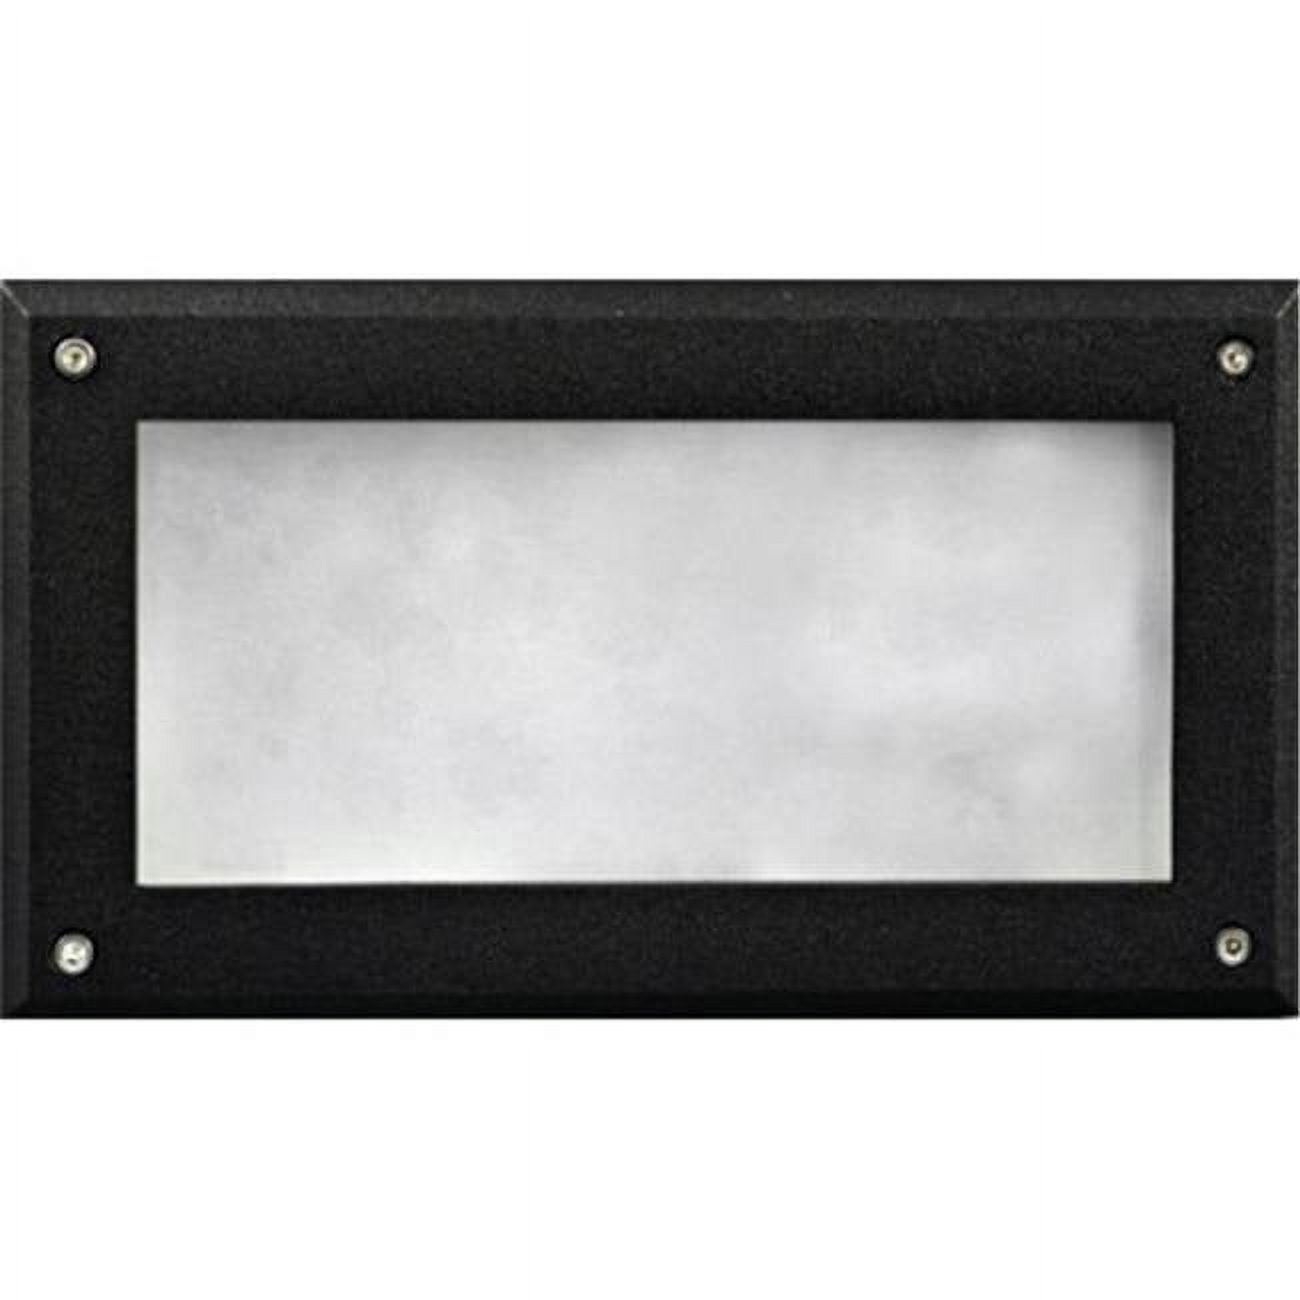 Picture of Dabmar Lighting DSL1013-B Recessed Open Face Brick, Step & Wall Light, Black - 5 x 8.90 x 3.15 in.